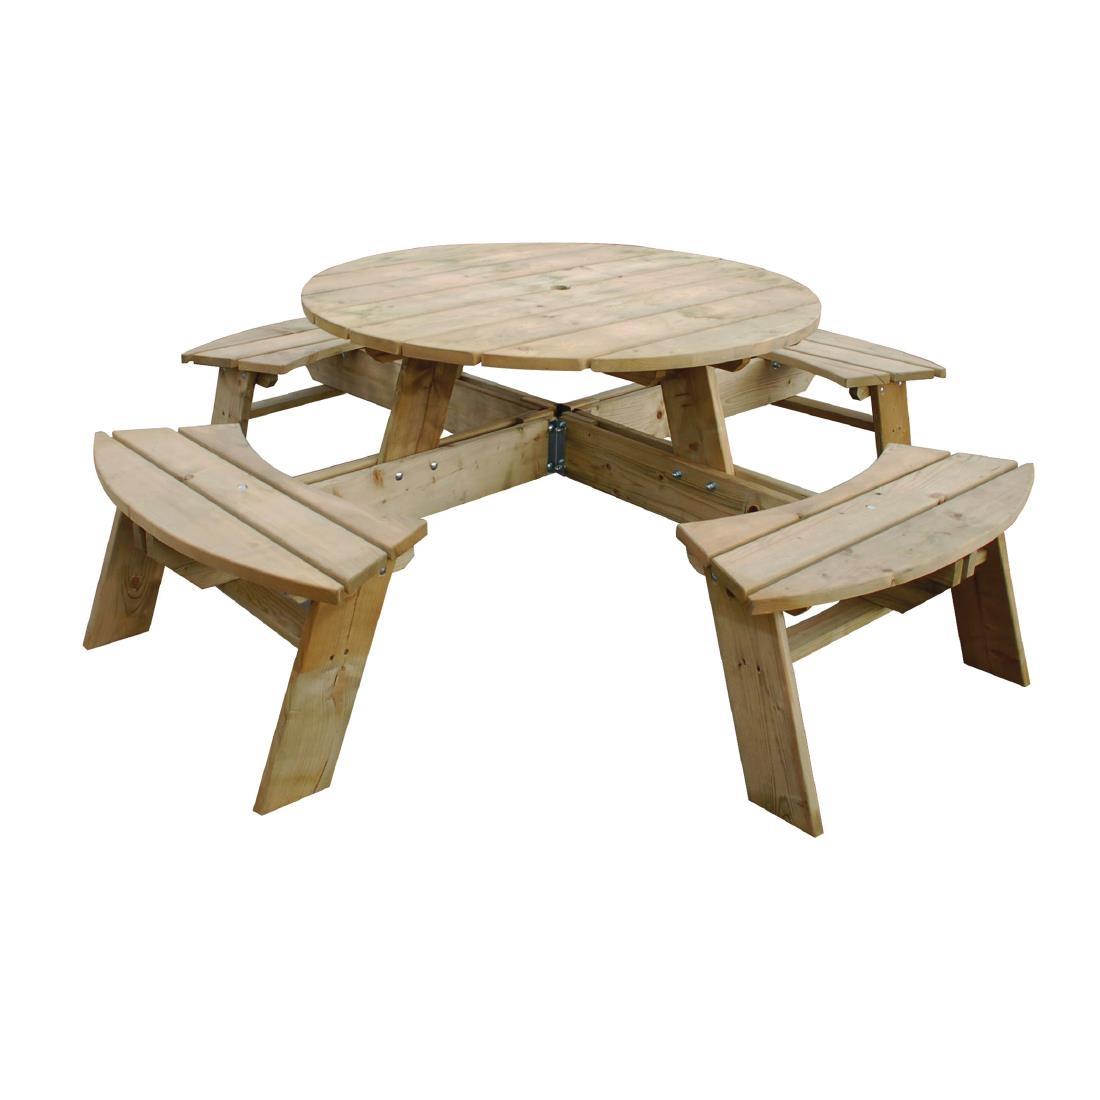 Rowlinson Round Wooden Picnic Table 6.5ft - CG097  - 1